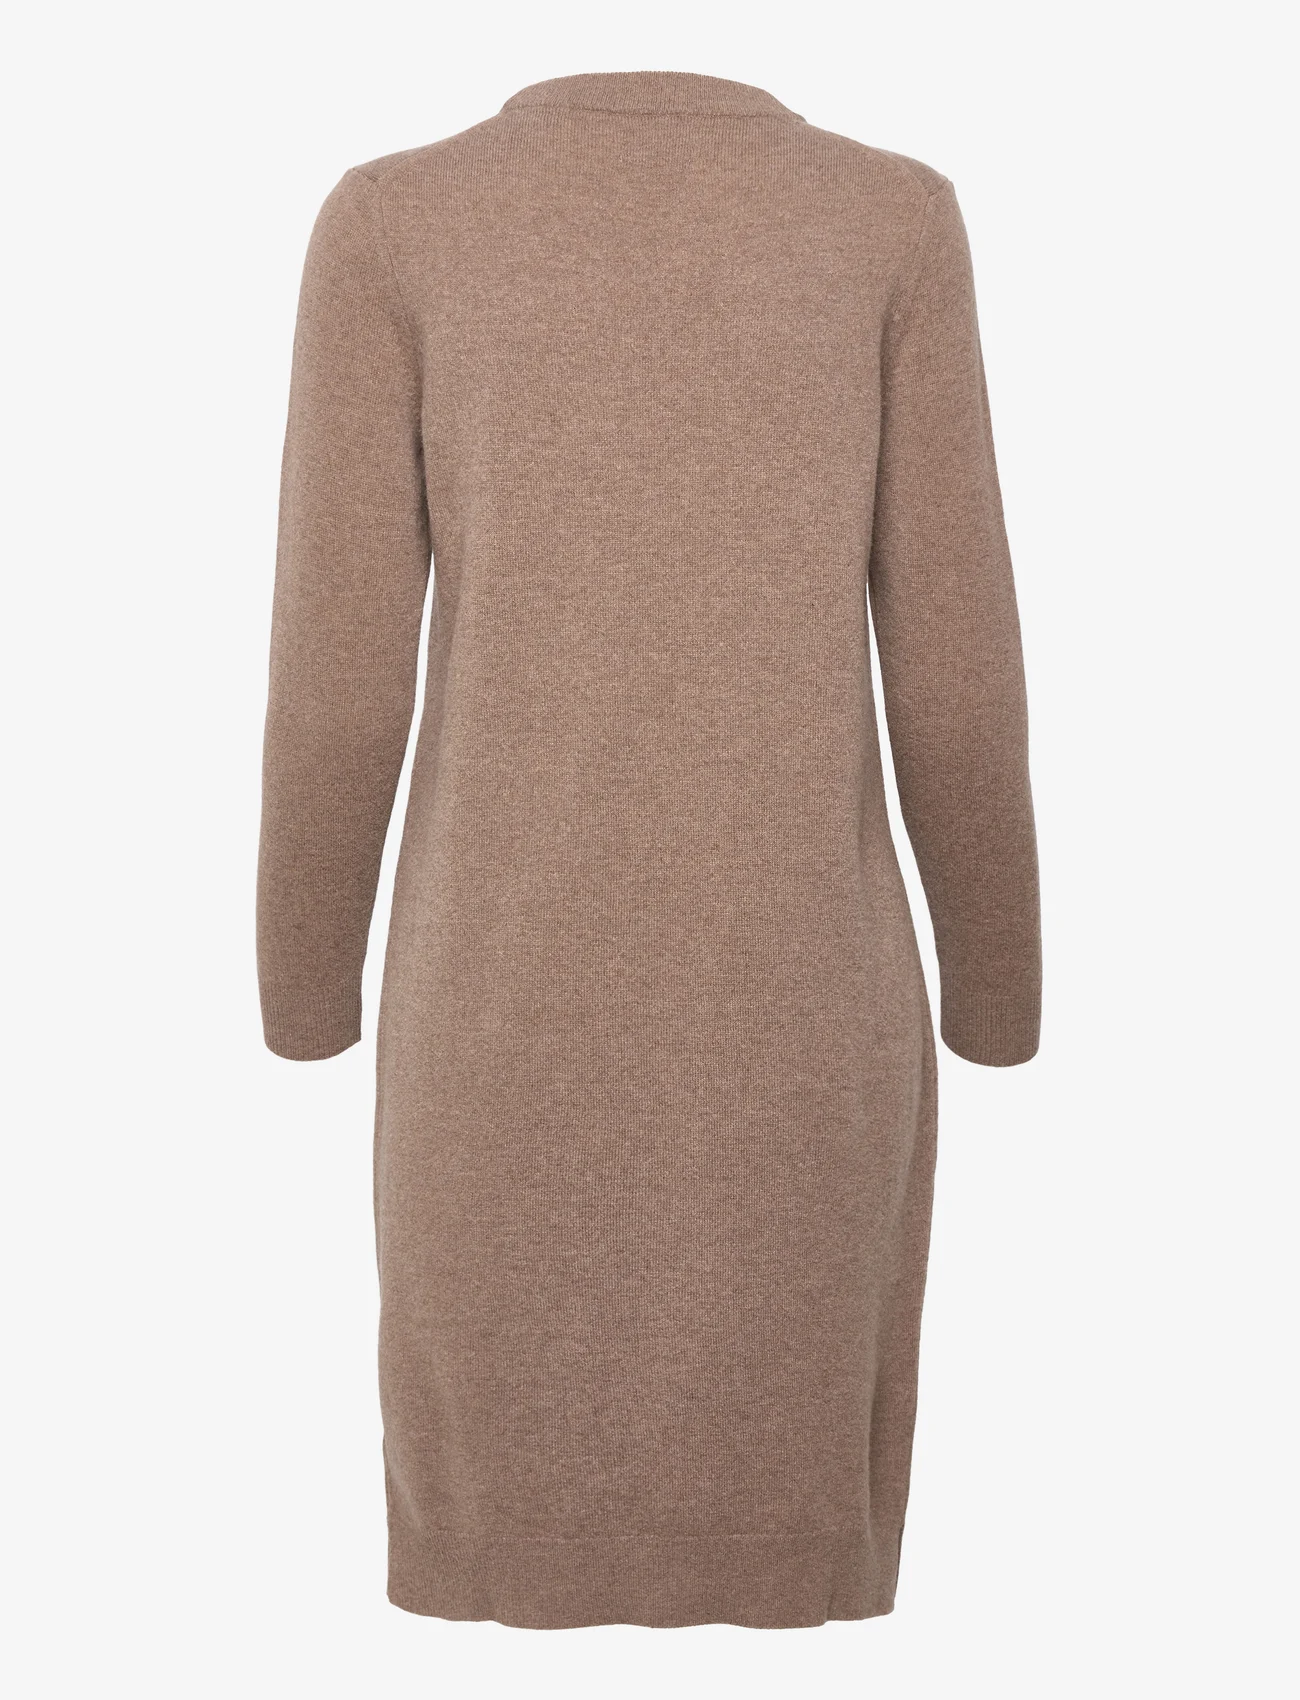 GANT - SUPERFINE LAMBSWOOL DRESS - knitted dresses - mole brown - 1